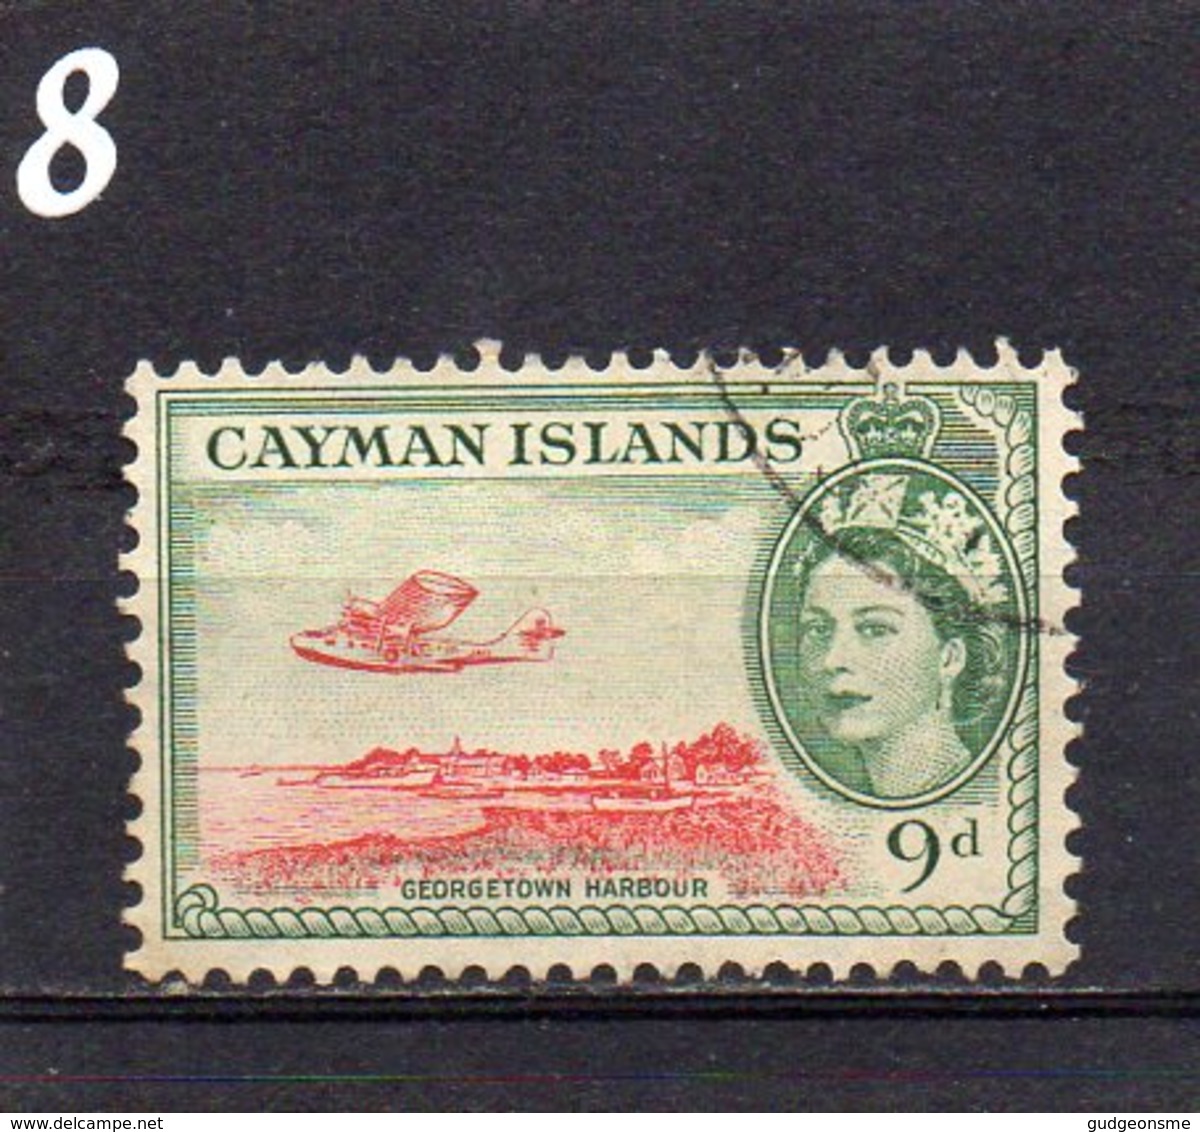 1953 QE11 Definitive Issue 9d Used - Cayman Islands